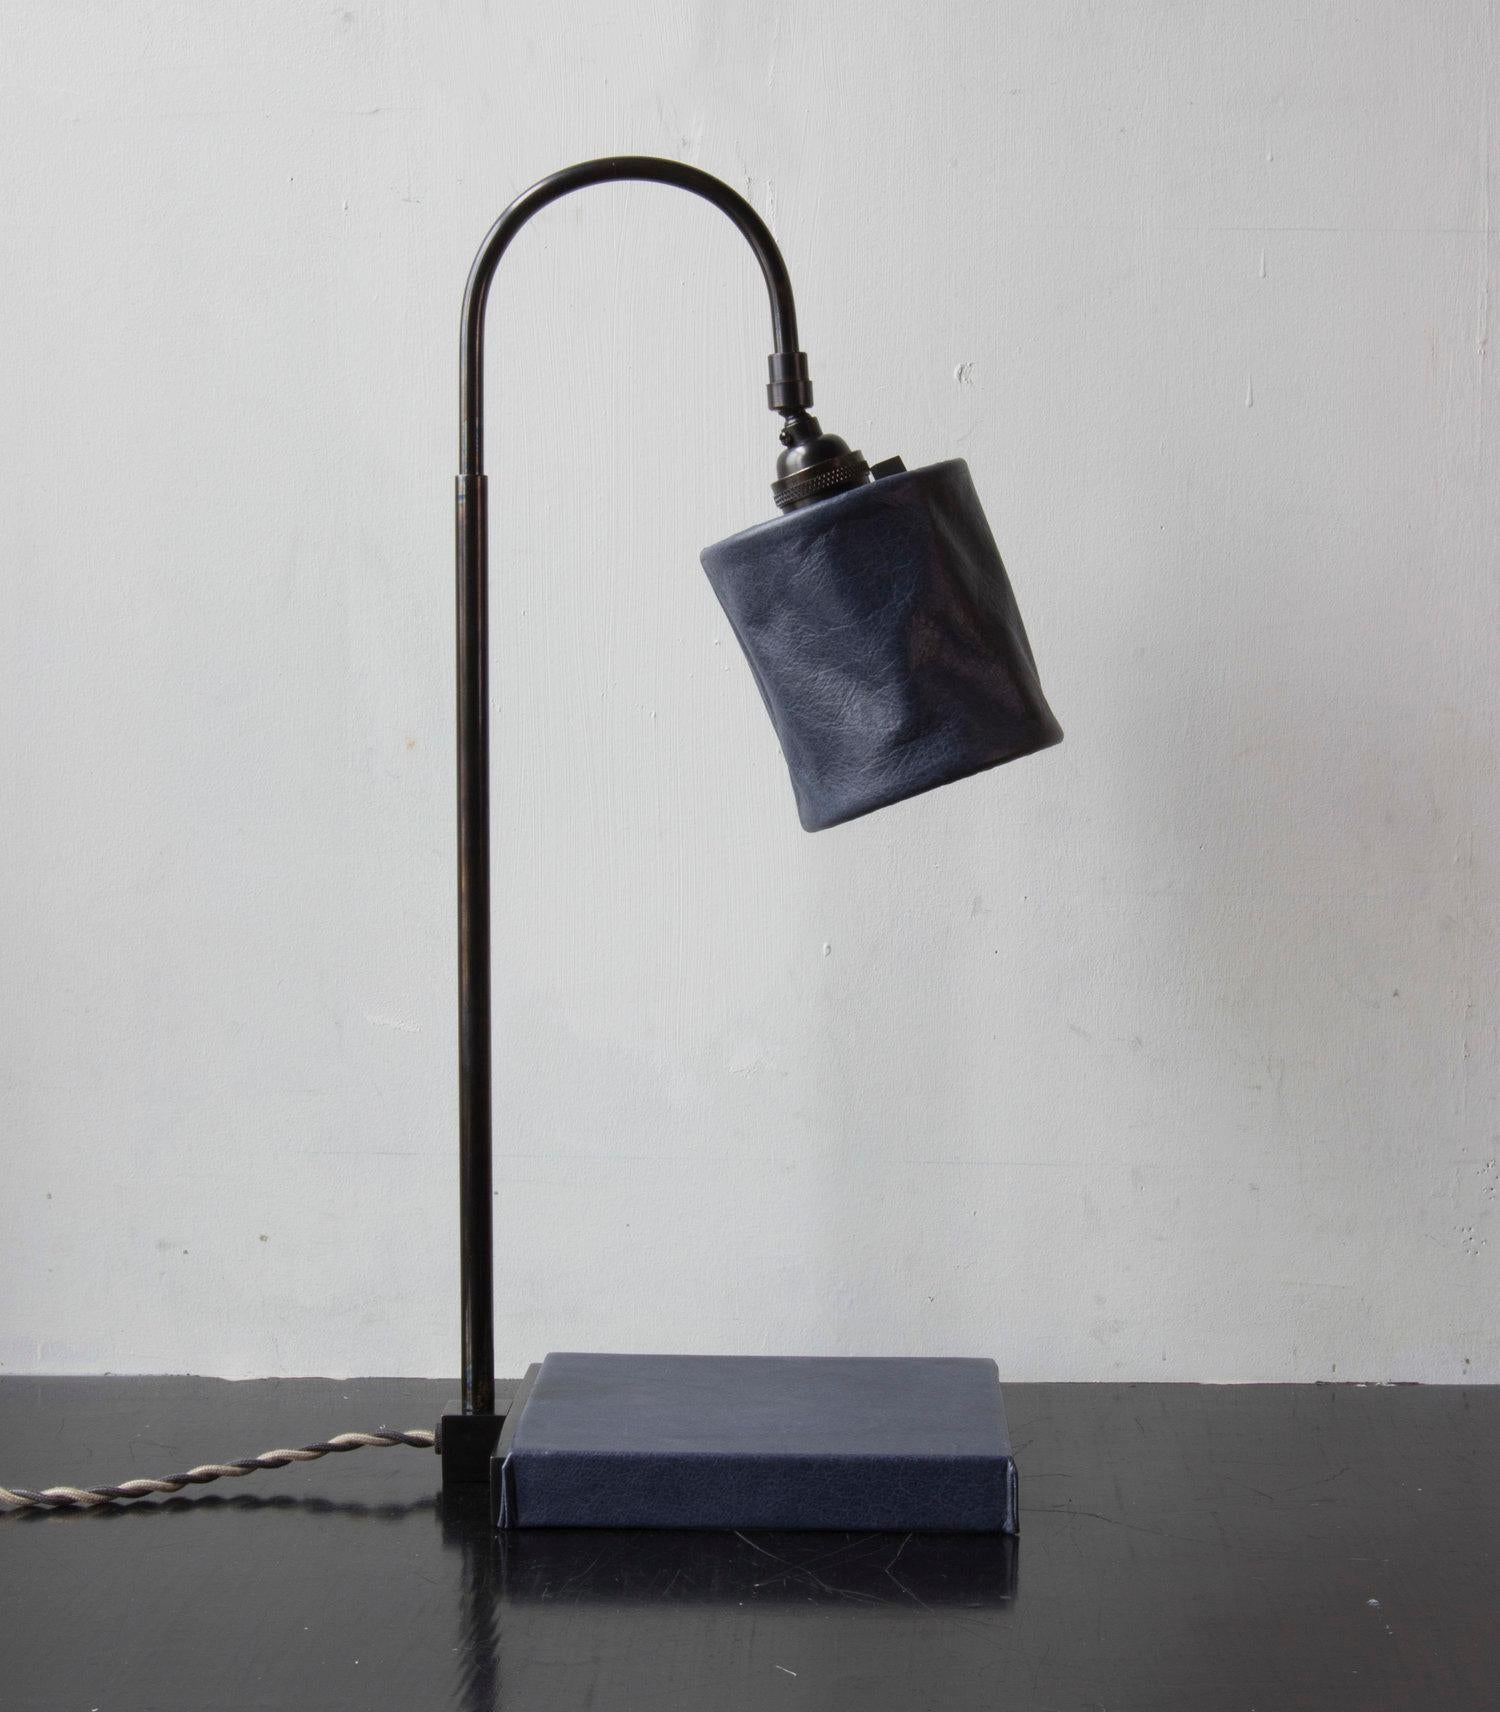 Series01 Desk Lamp, Hand-Dyed Ash 'Gray' Leather, Polished Unlacquered Brass For Sale 7